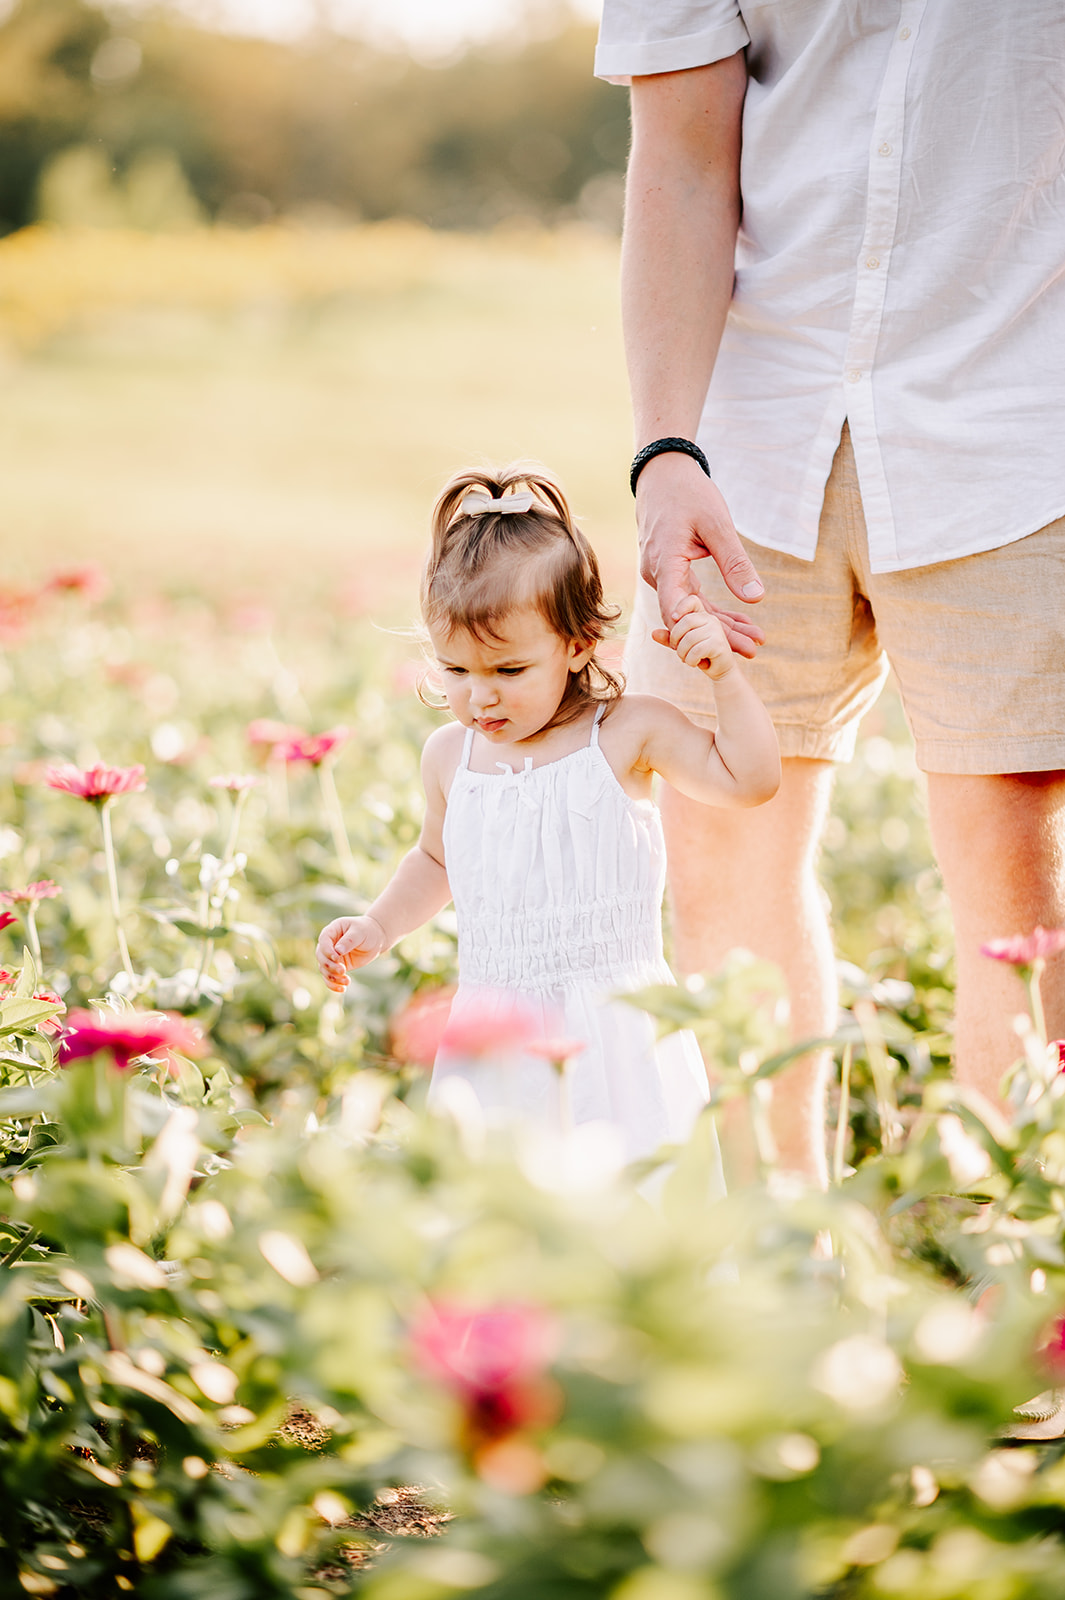 A toddler explores a field of red flowers while holding her father's finger Dogwood Farms